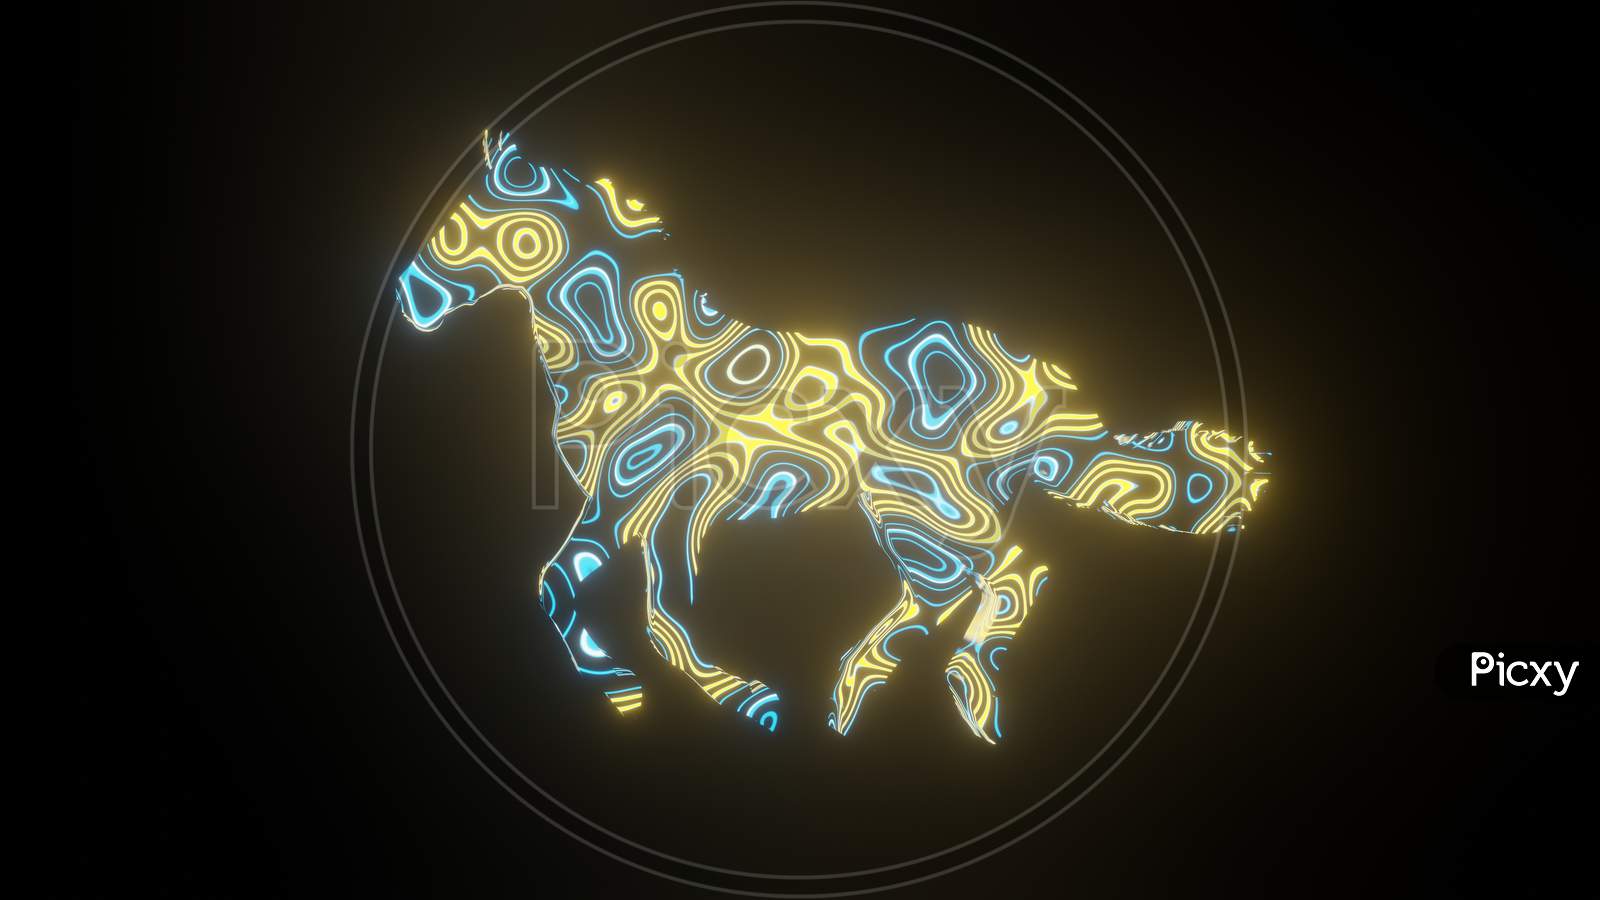 Illustration Graphic Of Beautiful Texture Or Pattern Formation On The Horse Body Shape, Isolated On Black Background. 3D Abstract Loop Neon Lighting Effect On Horse.